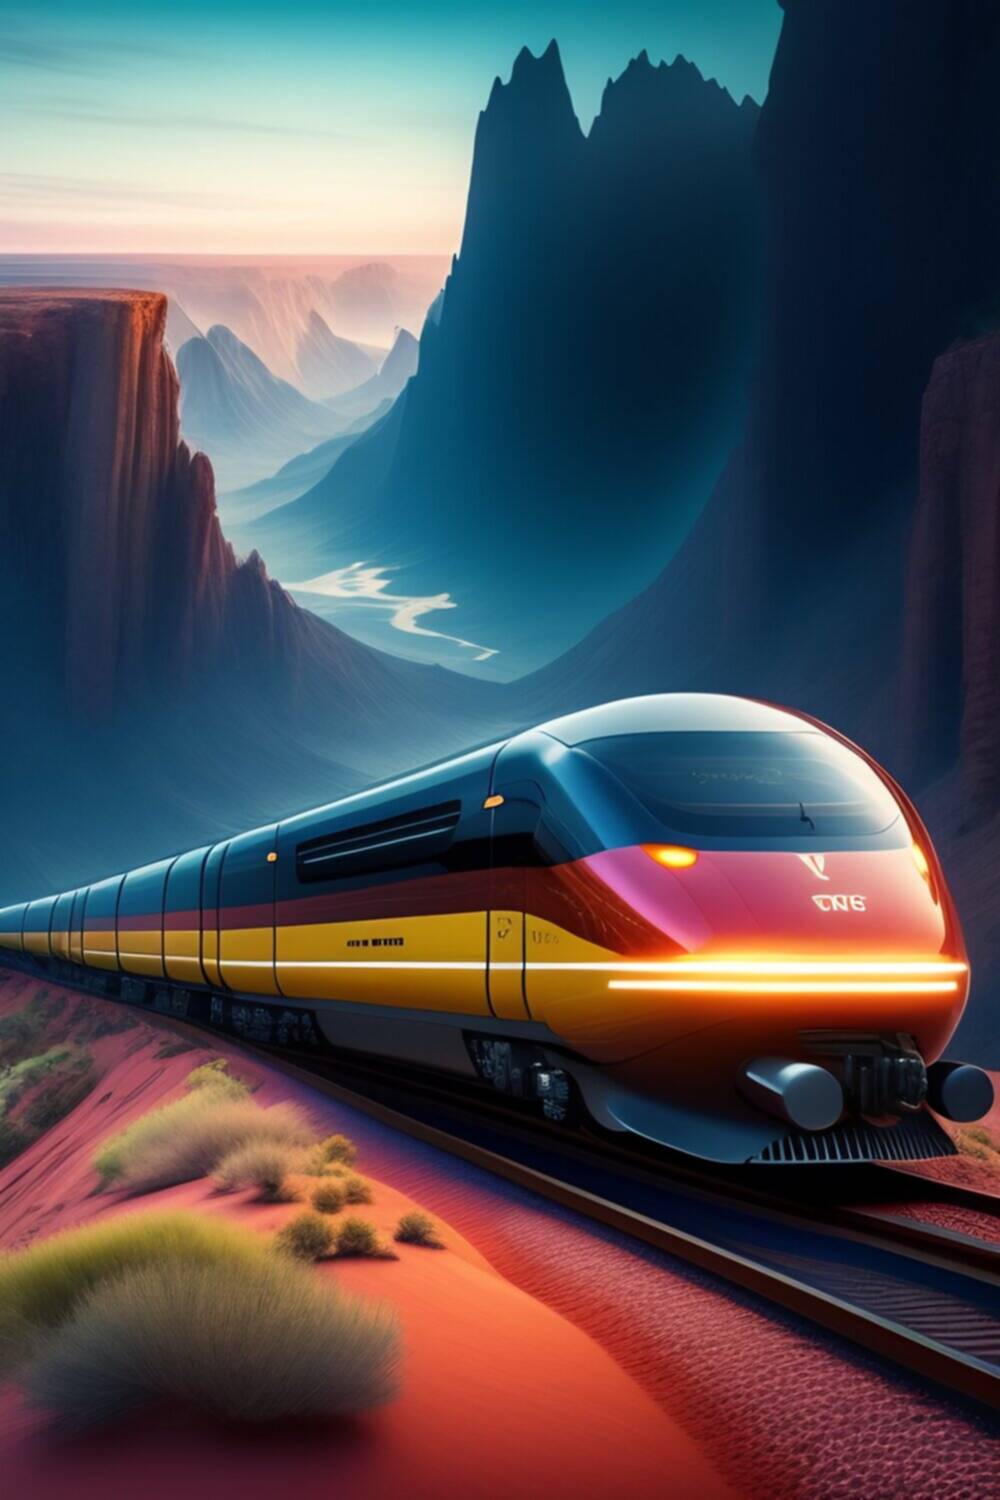 ​The world's highest railway is the Qinghai-Tibet Railway in China